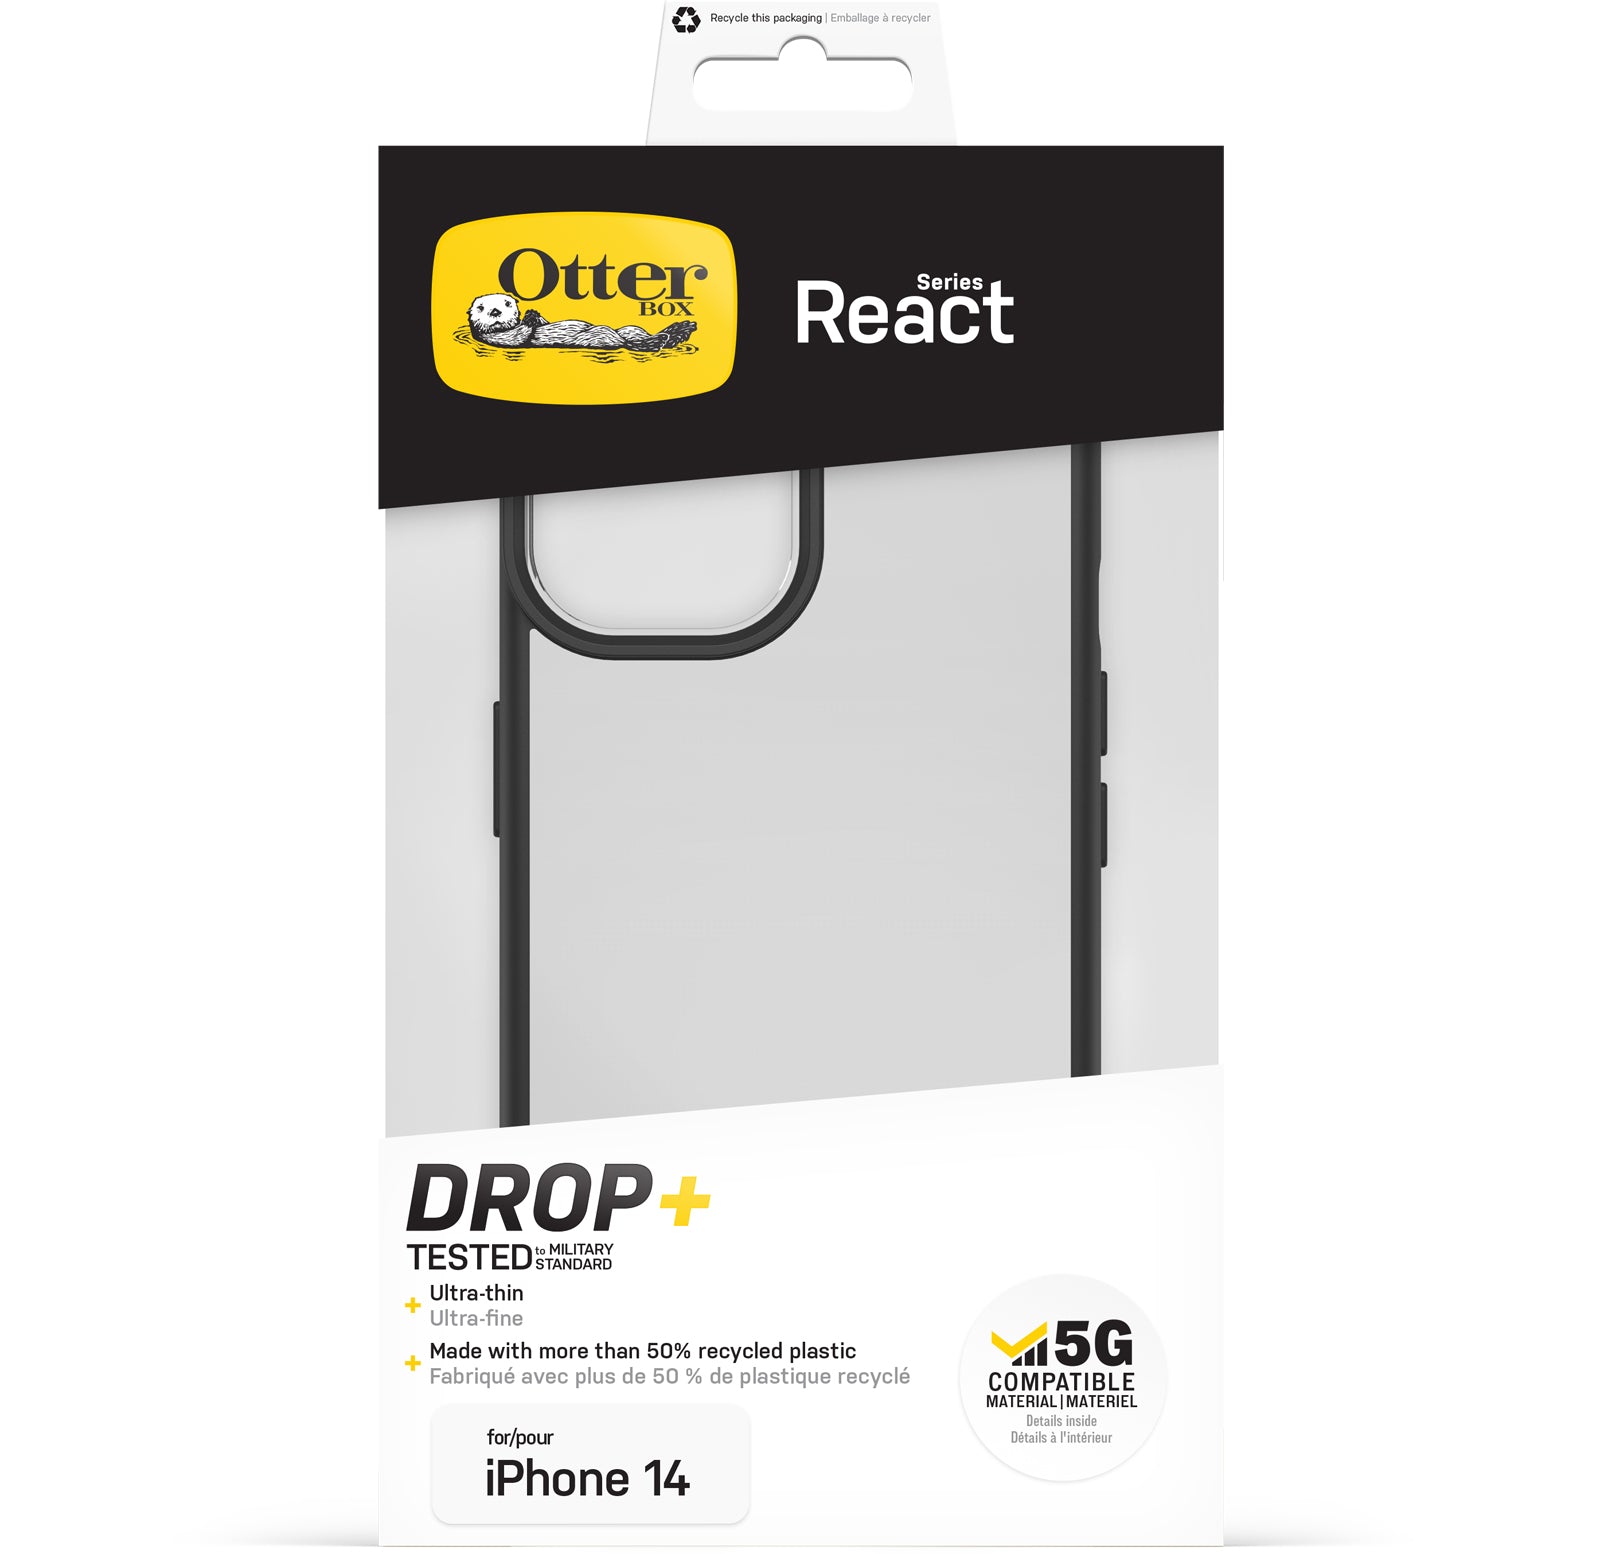 OtterBox React Case for iPhone 14